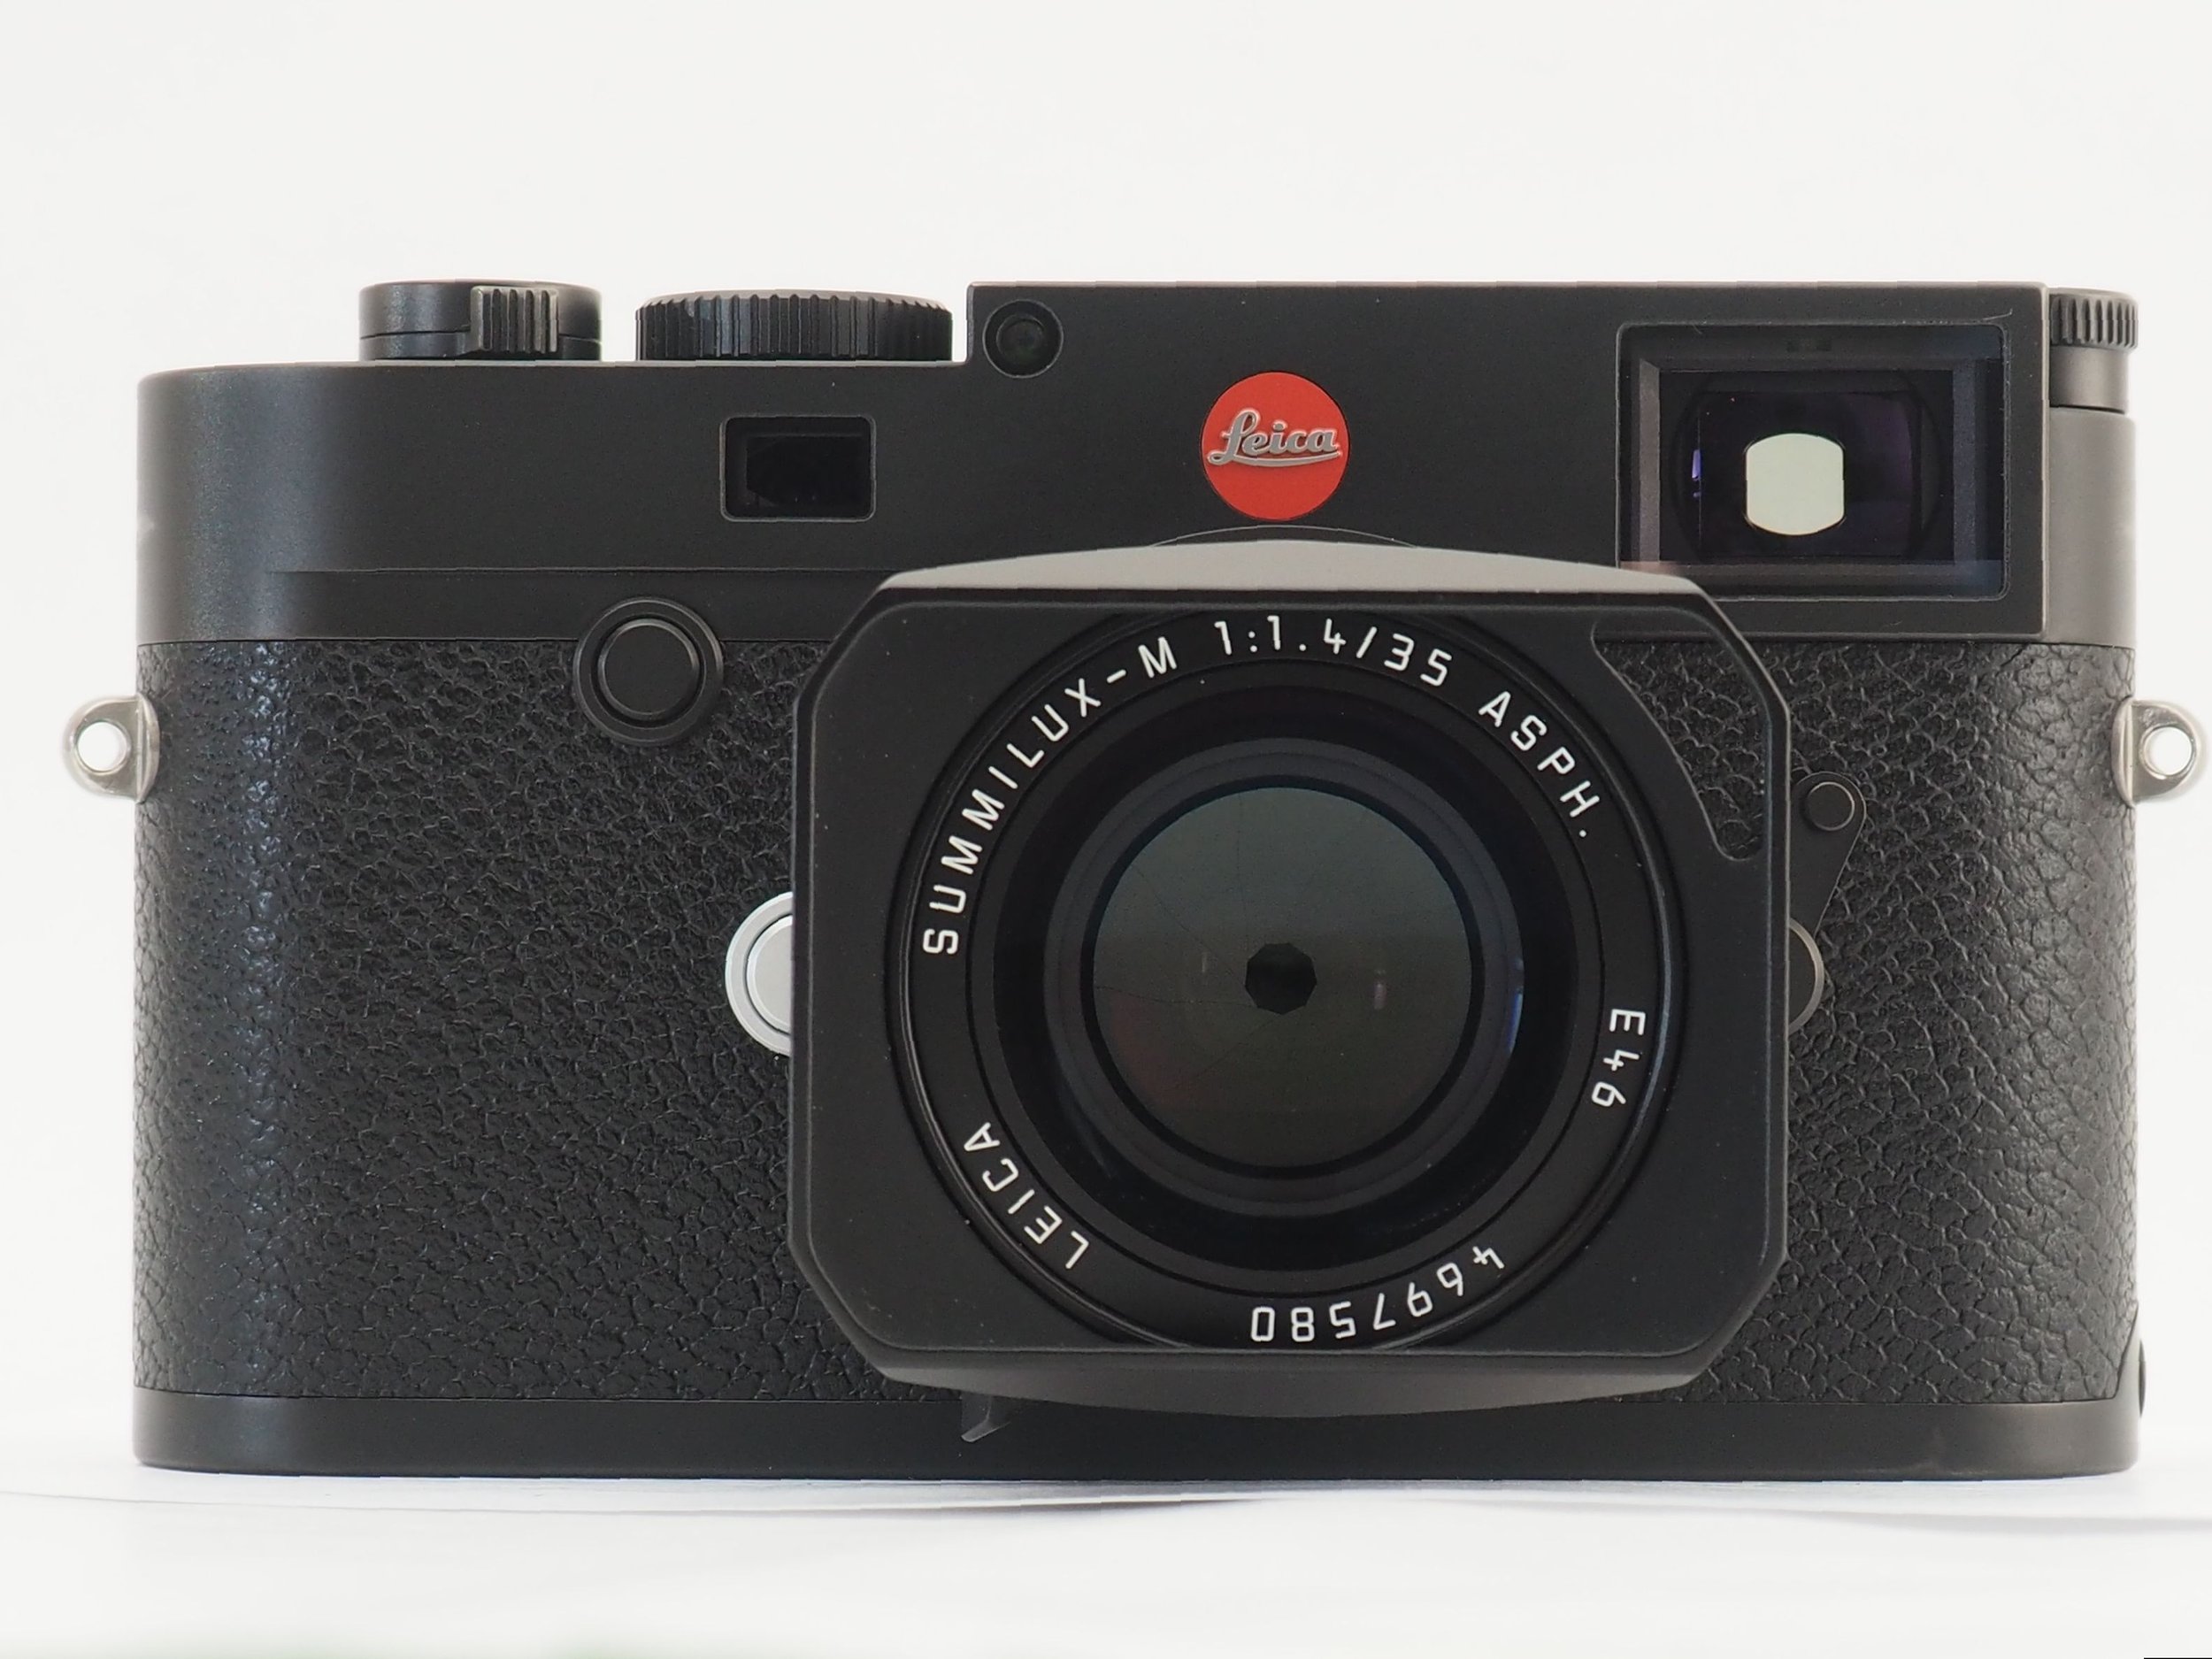 The Leica M10 Haptic (Fondler's) Review: Does it Feel Like a Real Leica? —  Peter M. Ferenczi